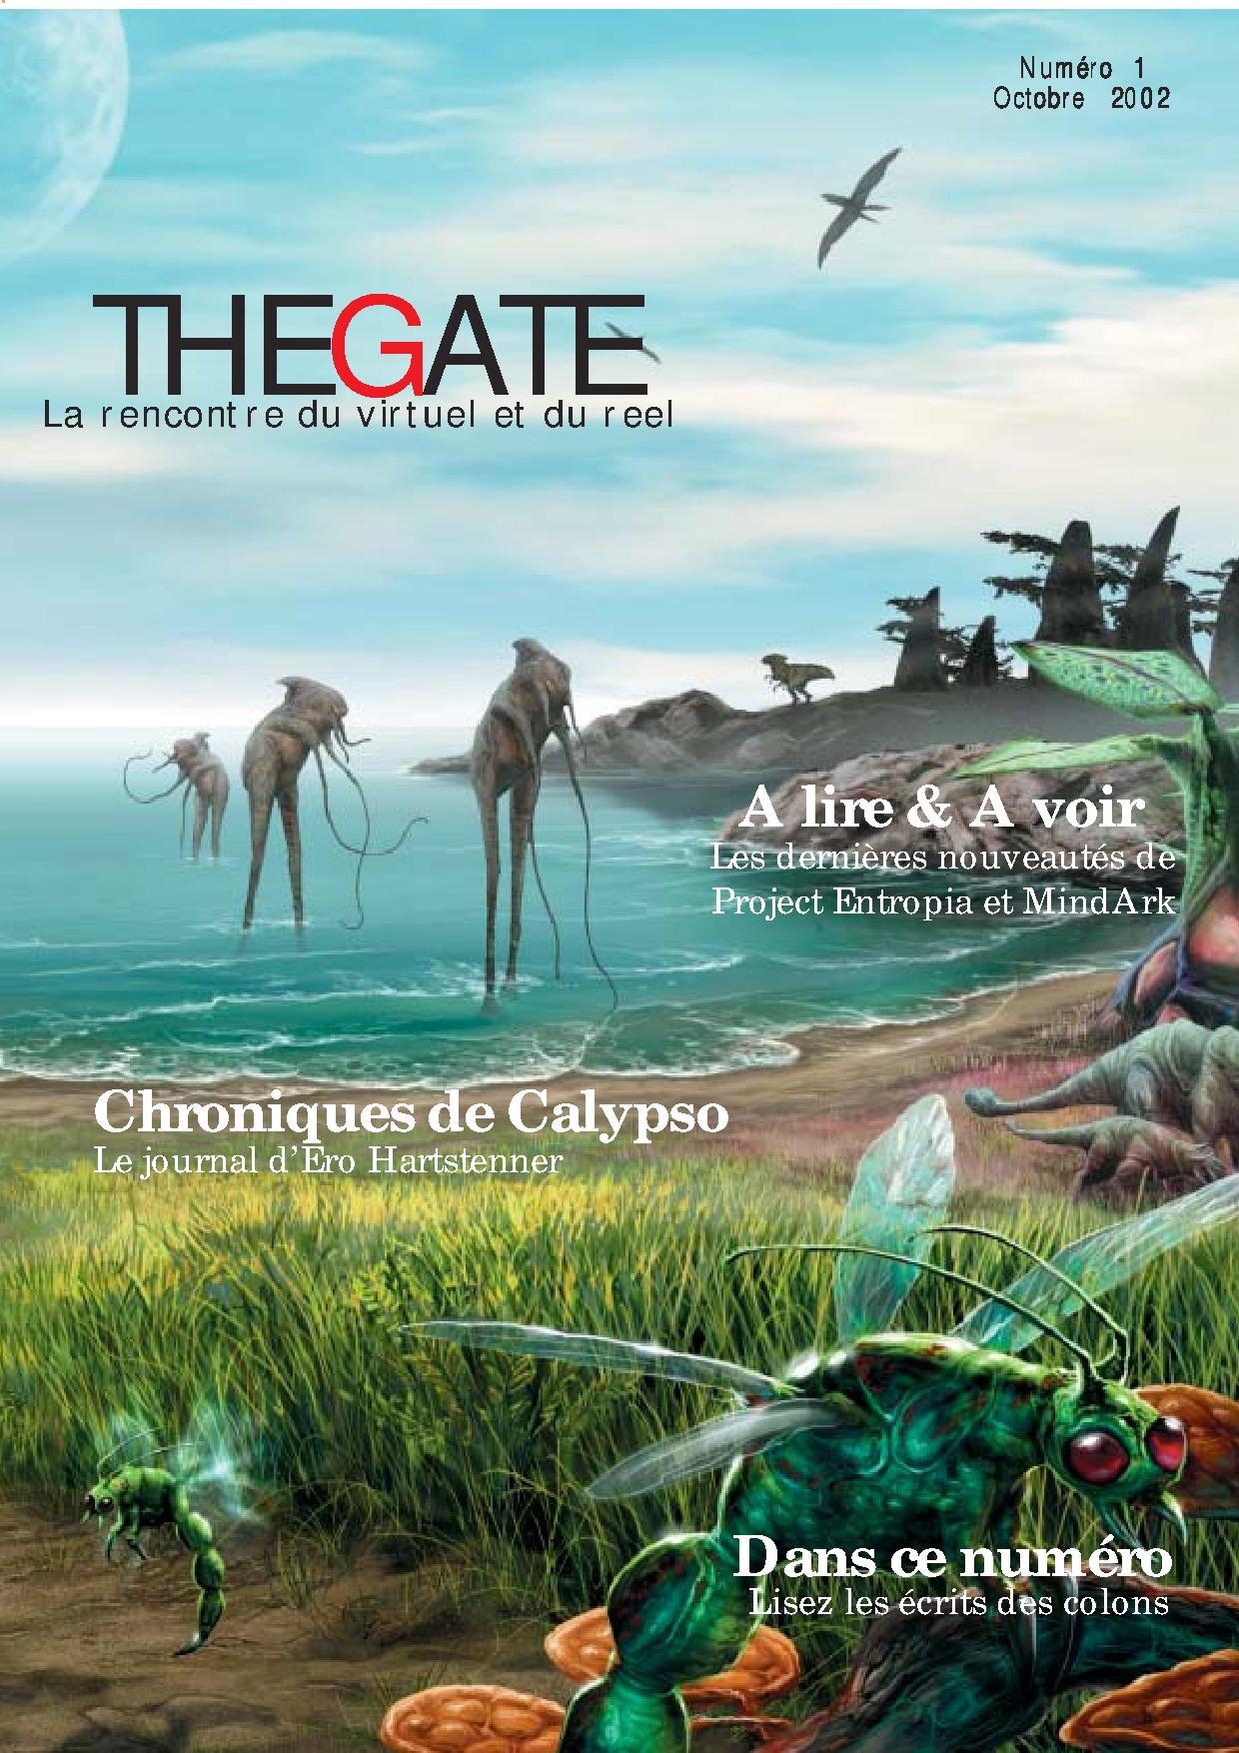 The Gate 10-2002 French.pdf